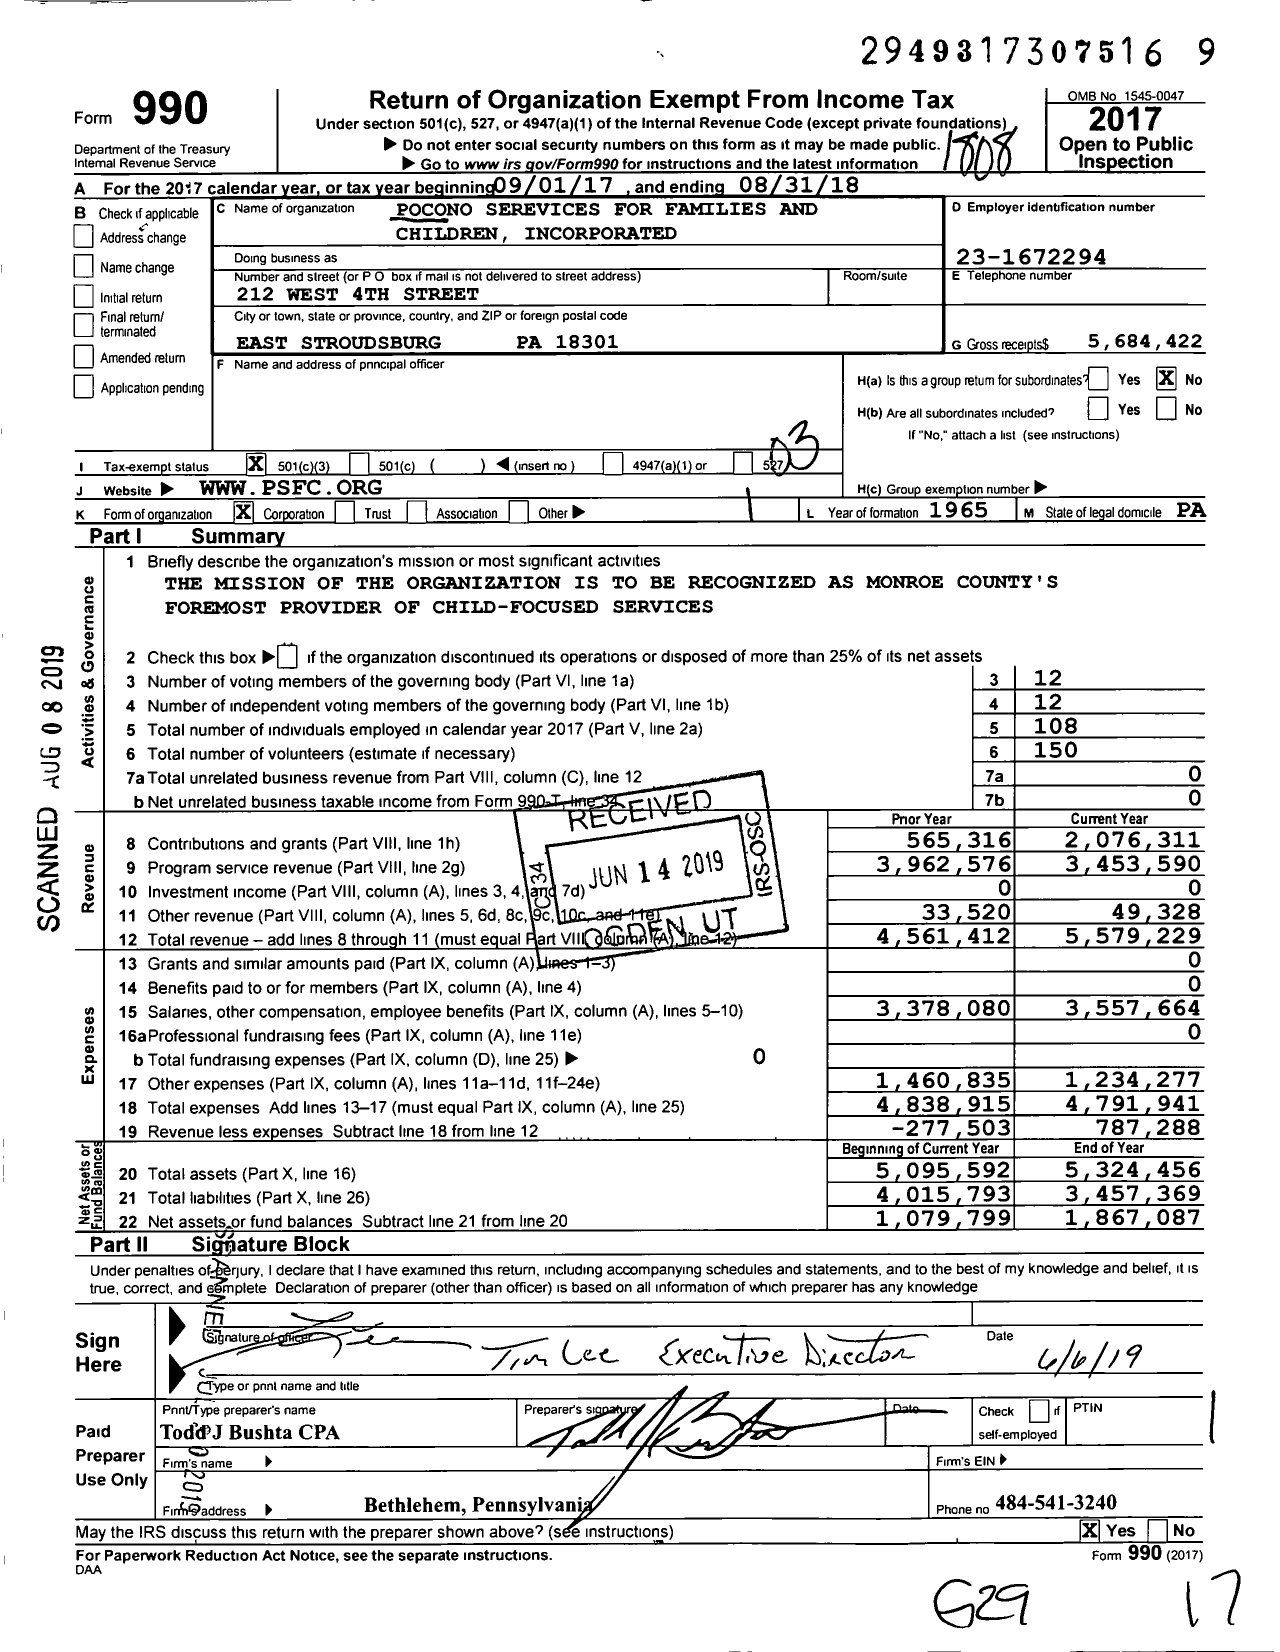 Image of first page of 2017 Form 990 for Pocono Services for Families and Children Incorporated